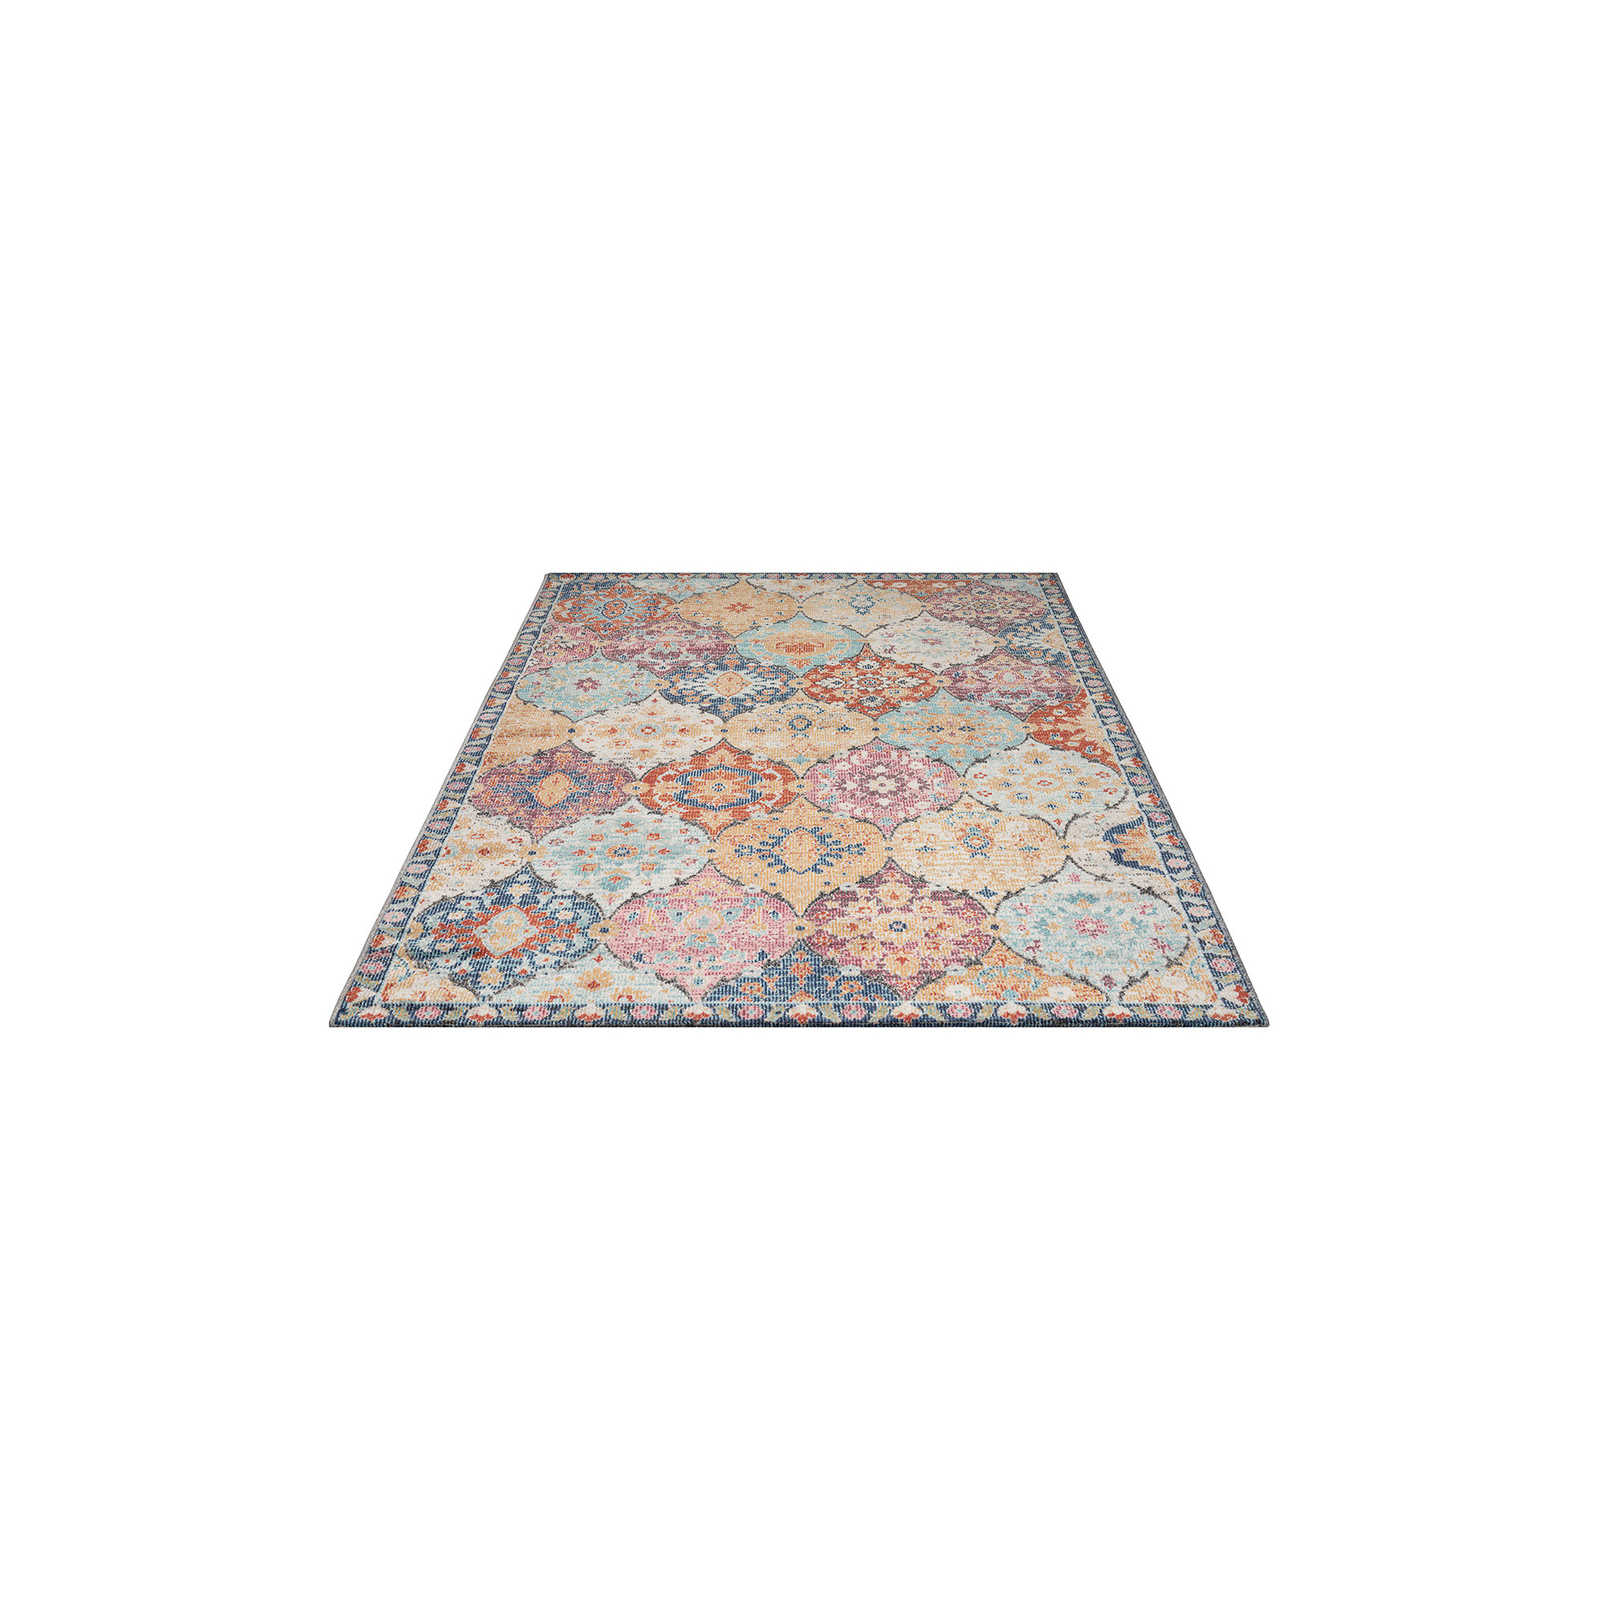 Colourful Flatweave Outdoor Rug - 200 x 140 cm
